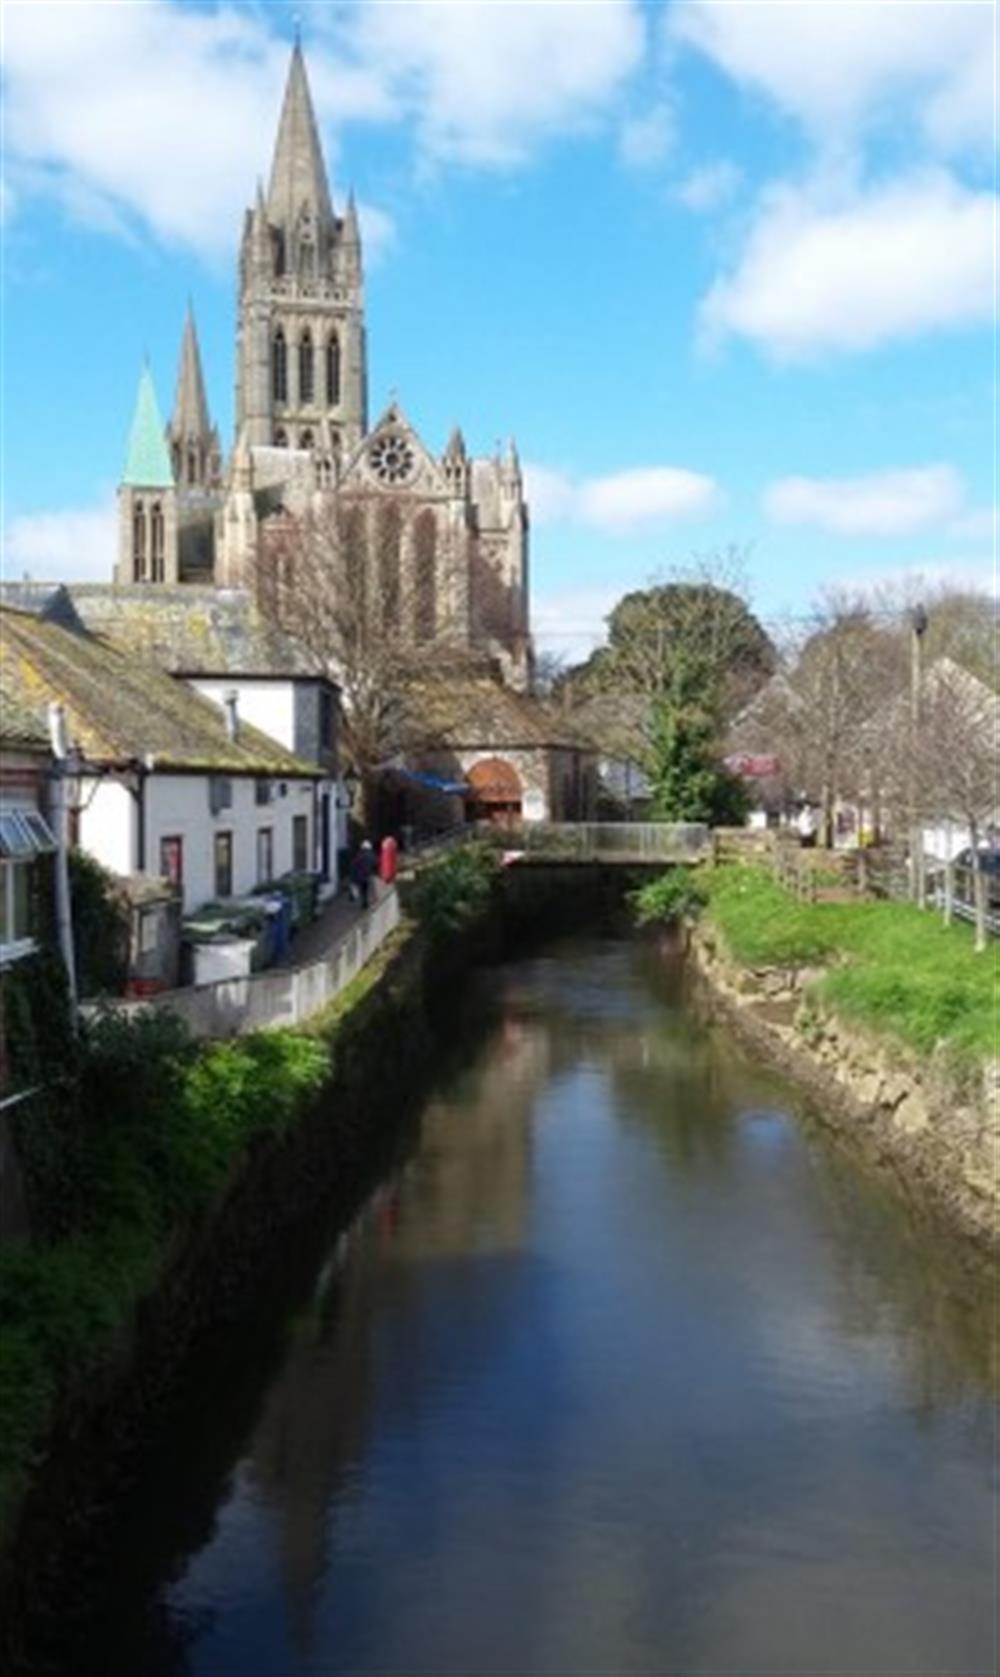 Truro is our capital and main shopping centre. Also perfect for cafes or a walk around the cathedral.